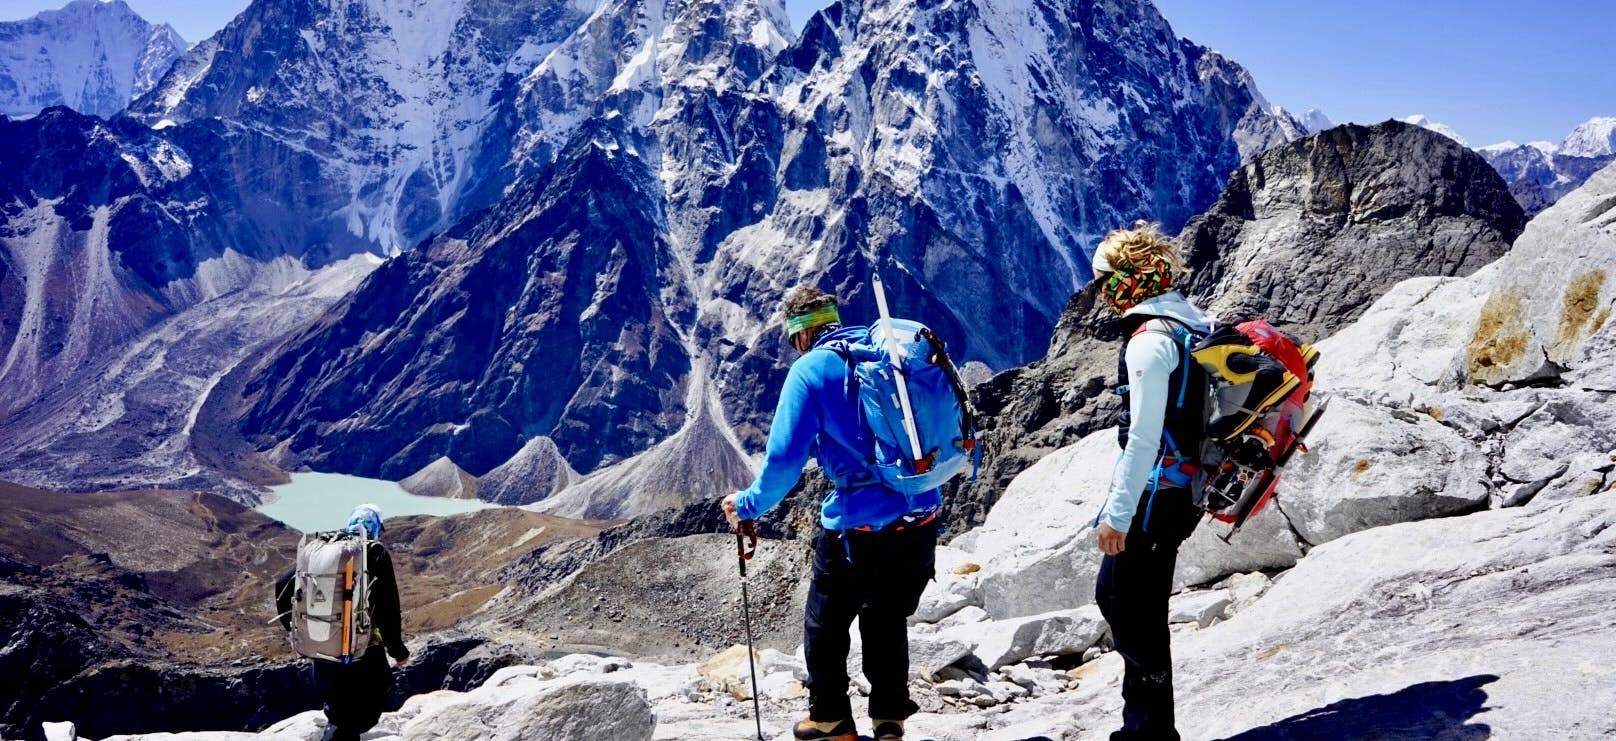 The Top 5 Climbing Peaks in Nepal for Beginners